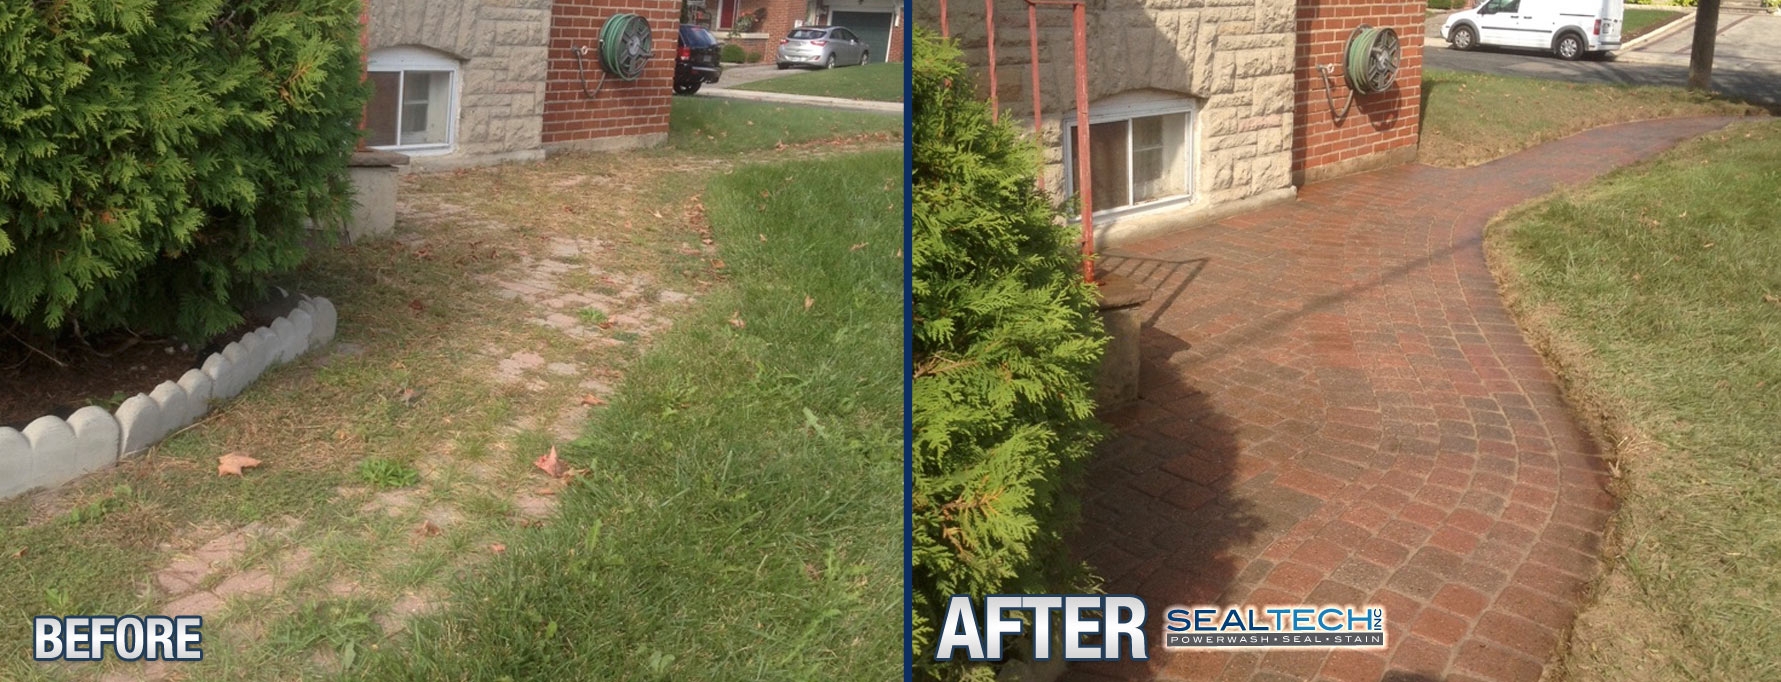 Interlock-weed-removal-toronto-before-after-